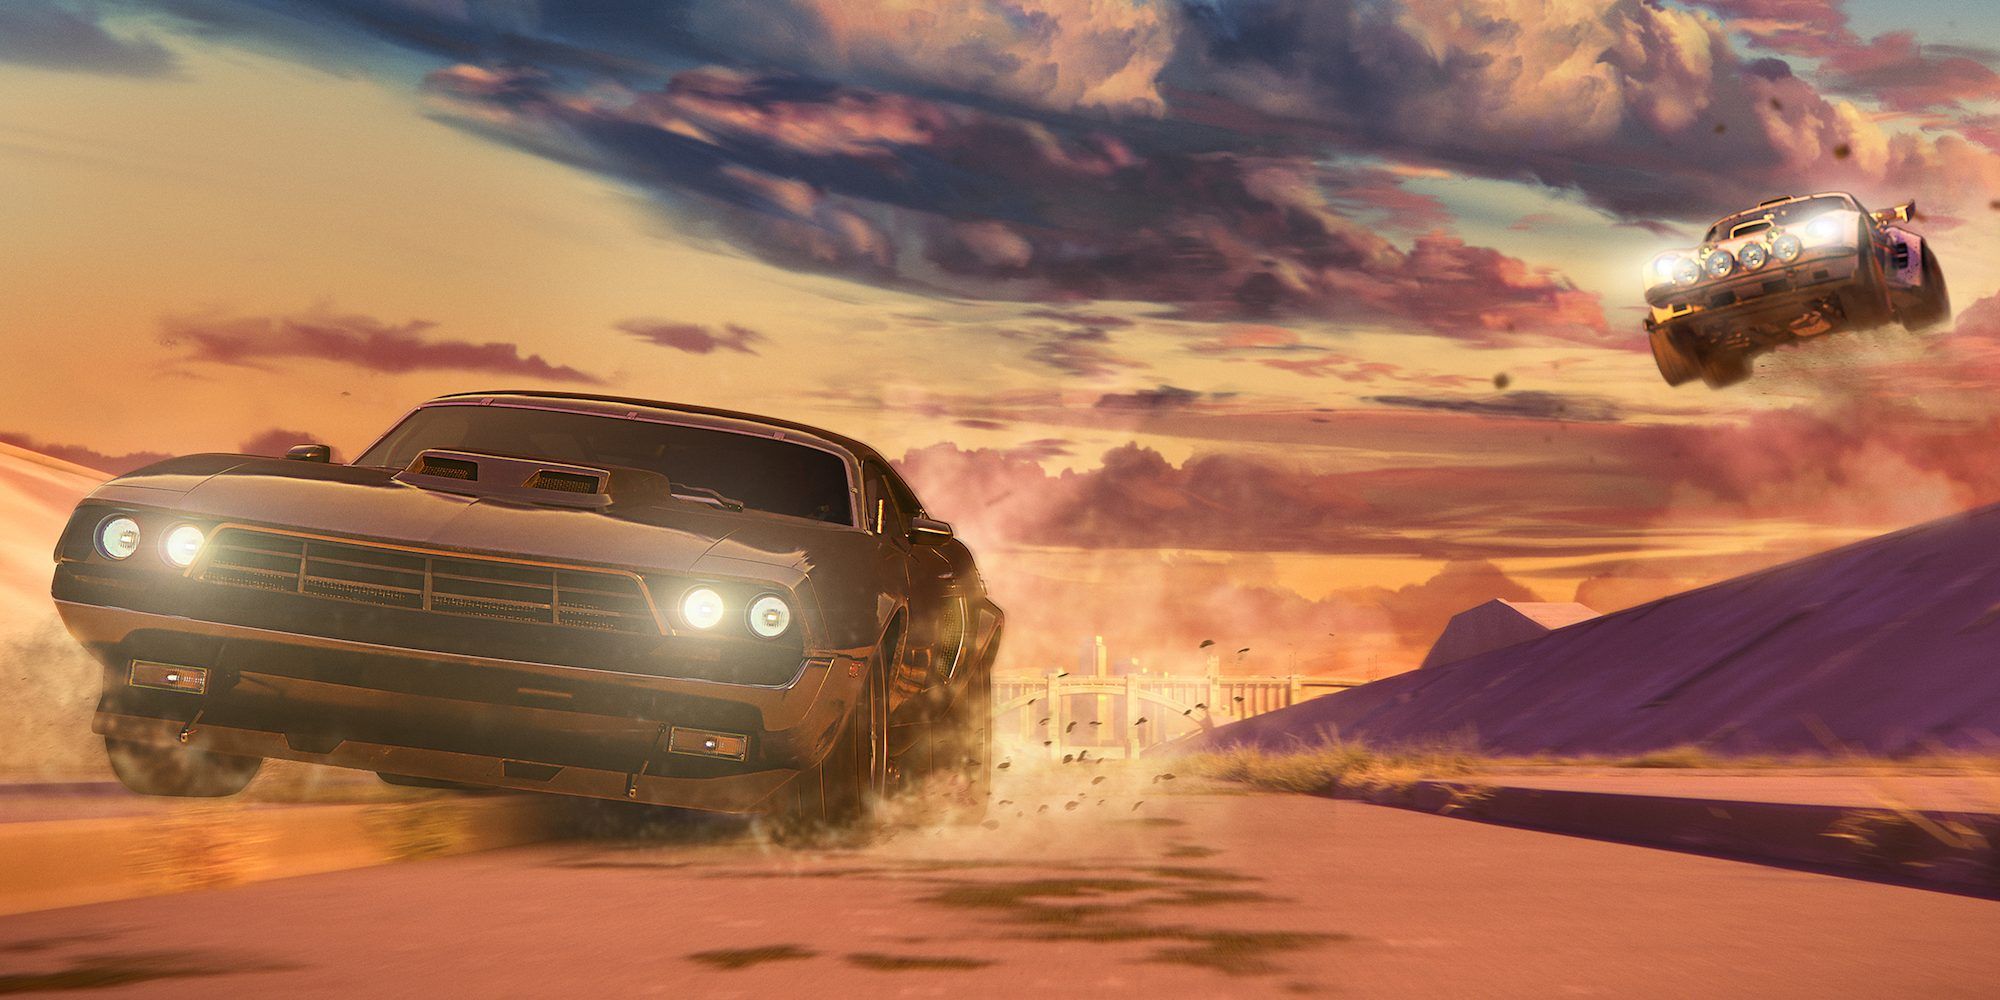 Fast & Furious: Spy Racers Teaser - First Look At Animated Series